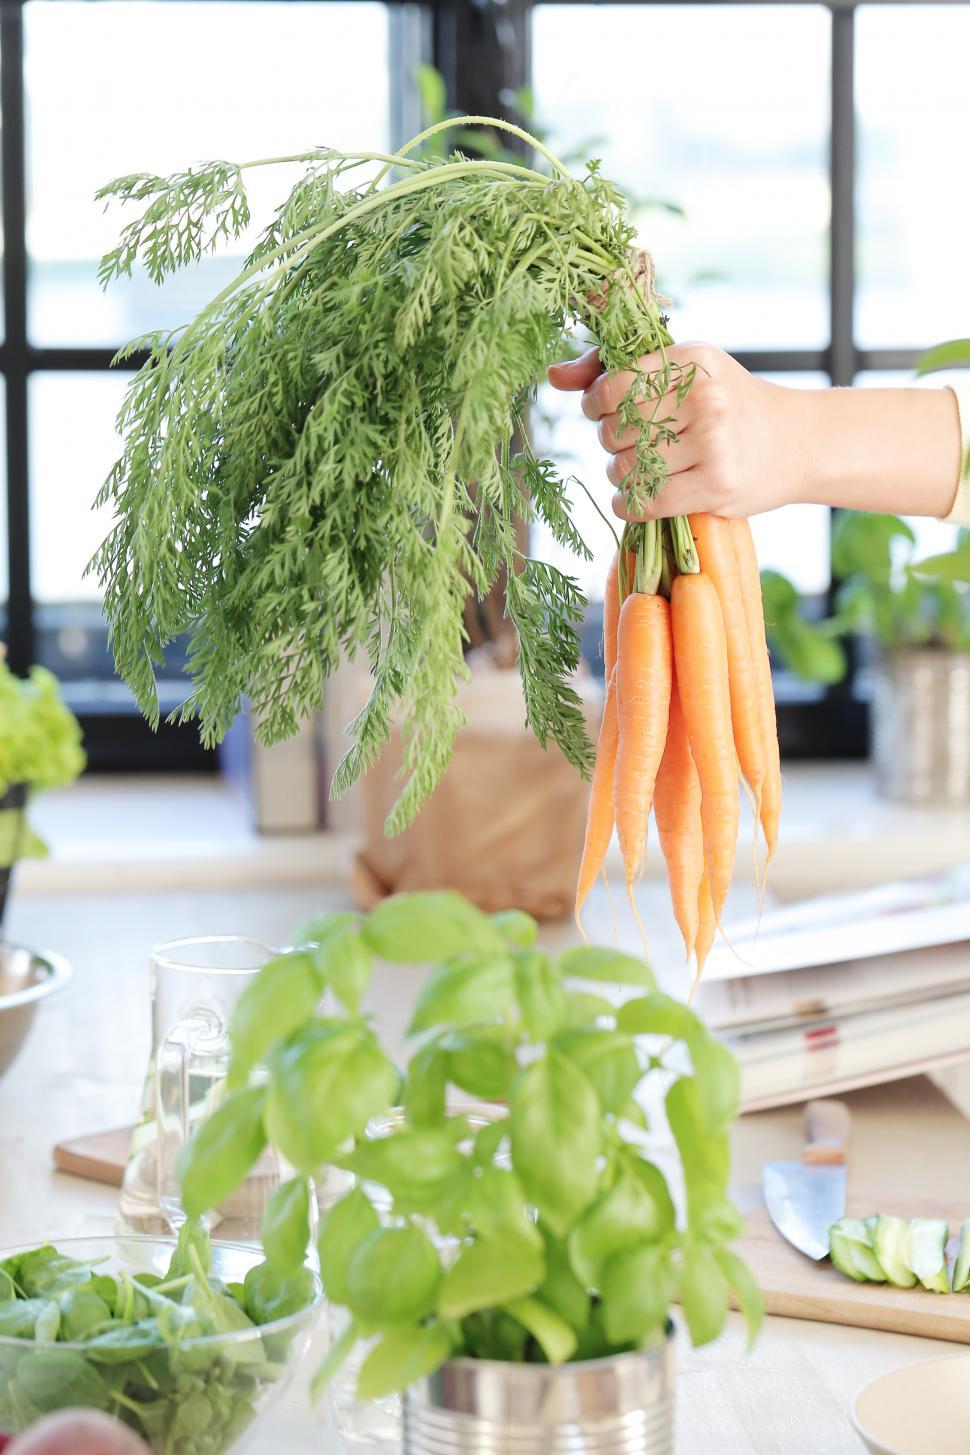 Free Image of Handfull of untrimmed carrots 